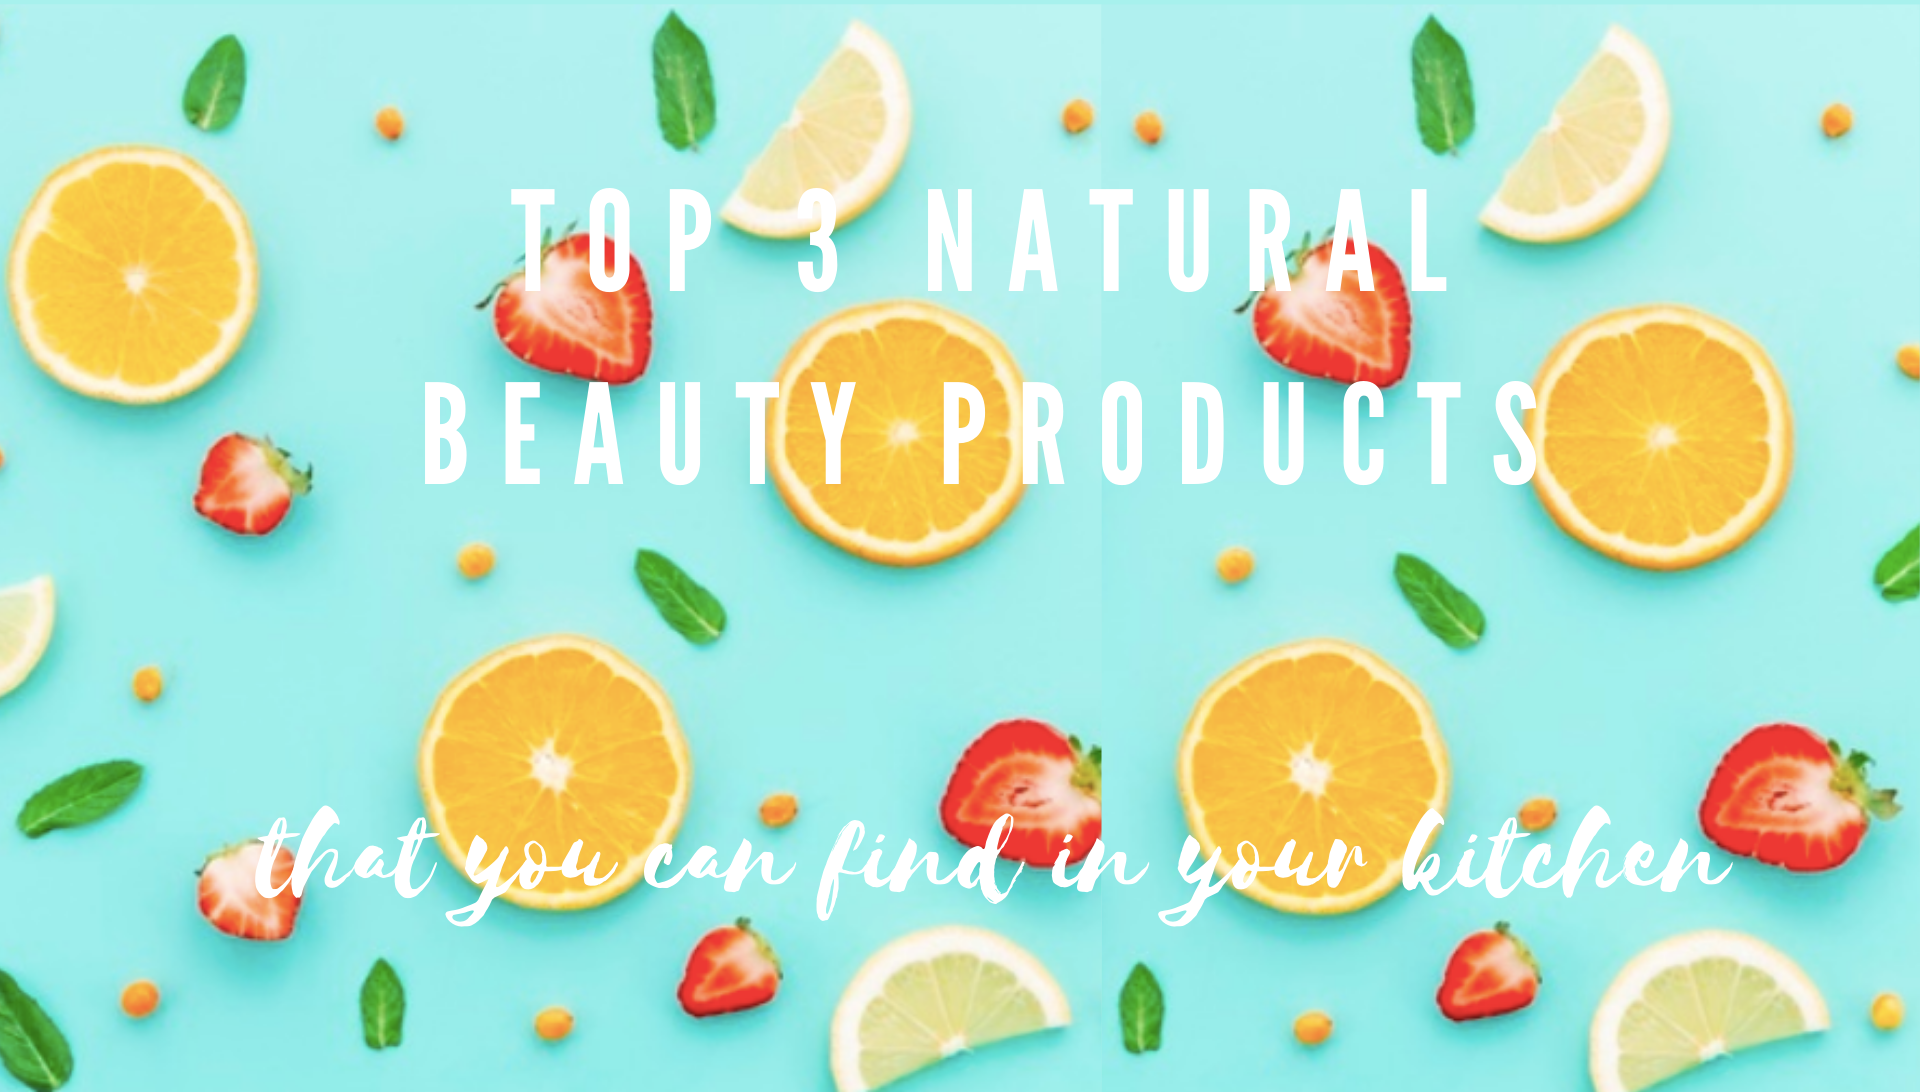 Top 3 natural beauty Products